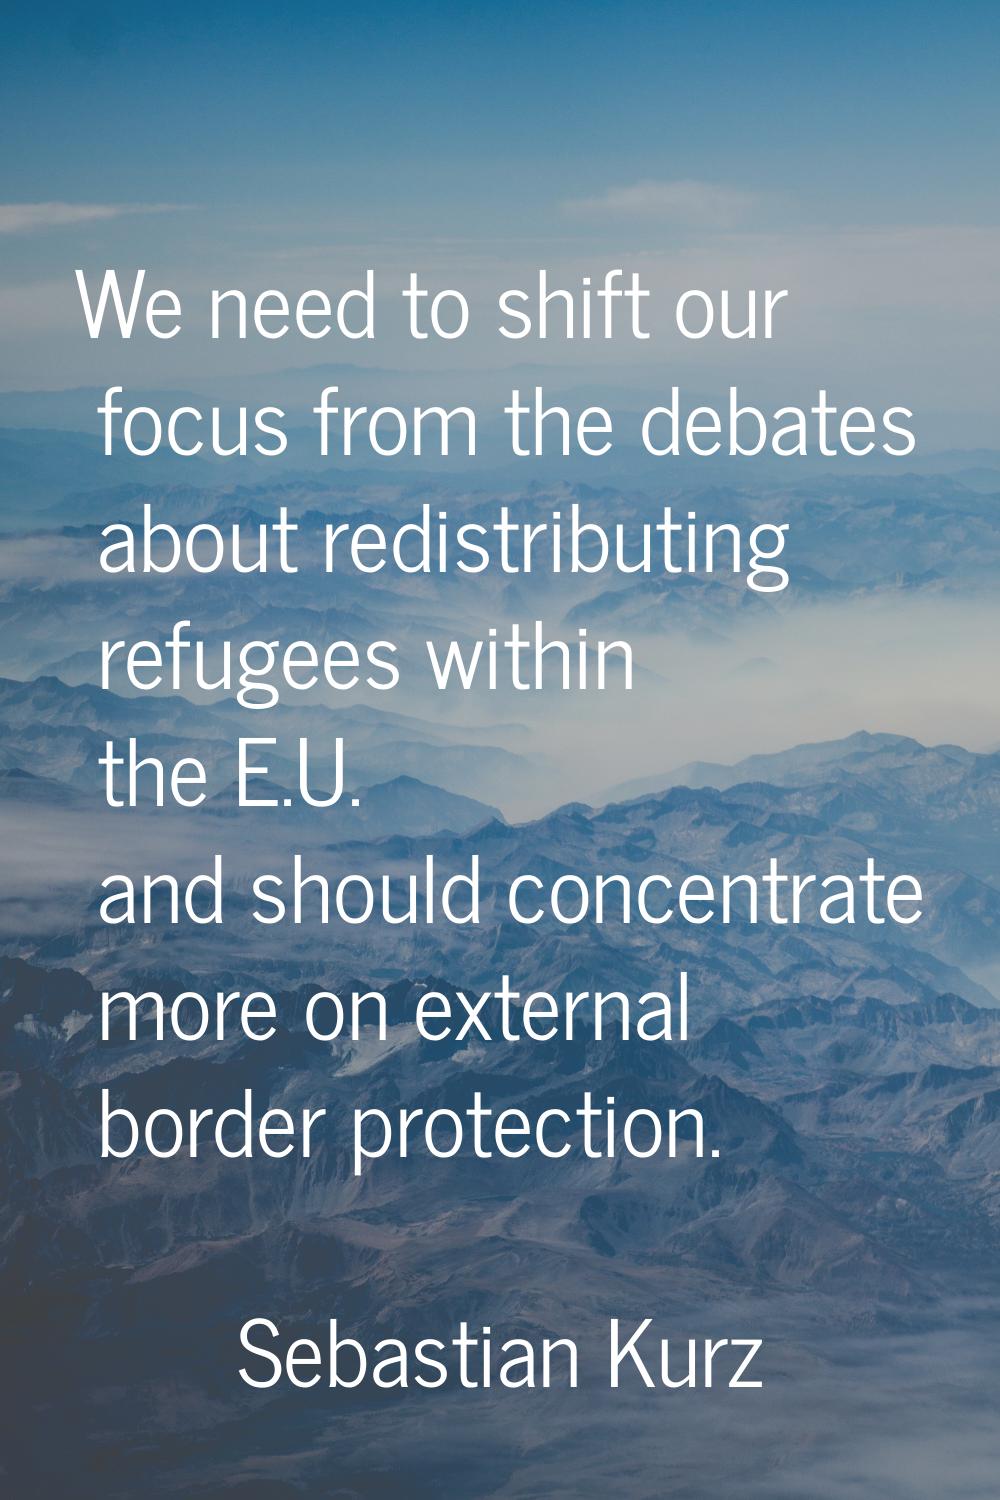 We need to shift our focus from the debates about redistributing refugees within the E.U. and shoul